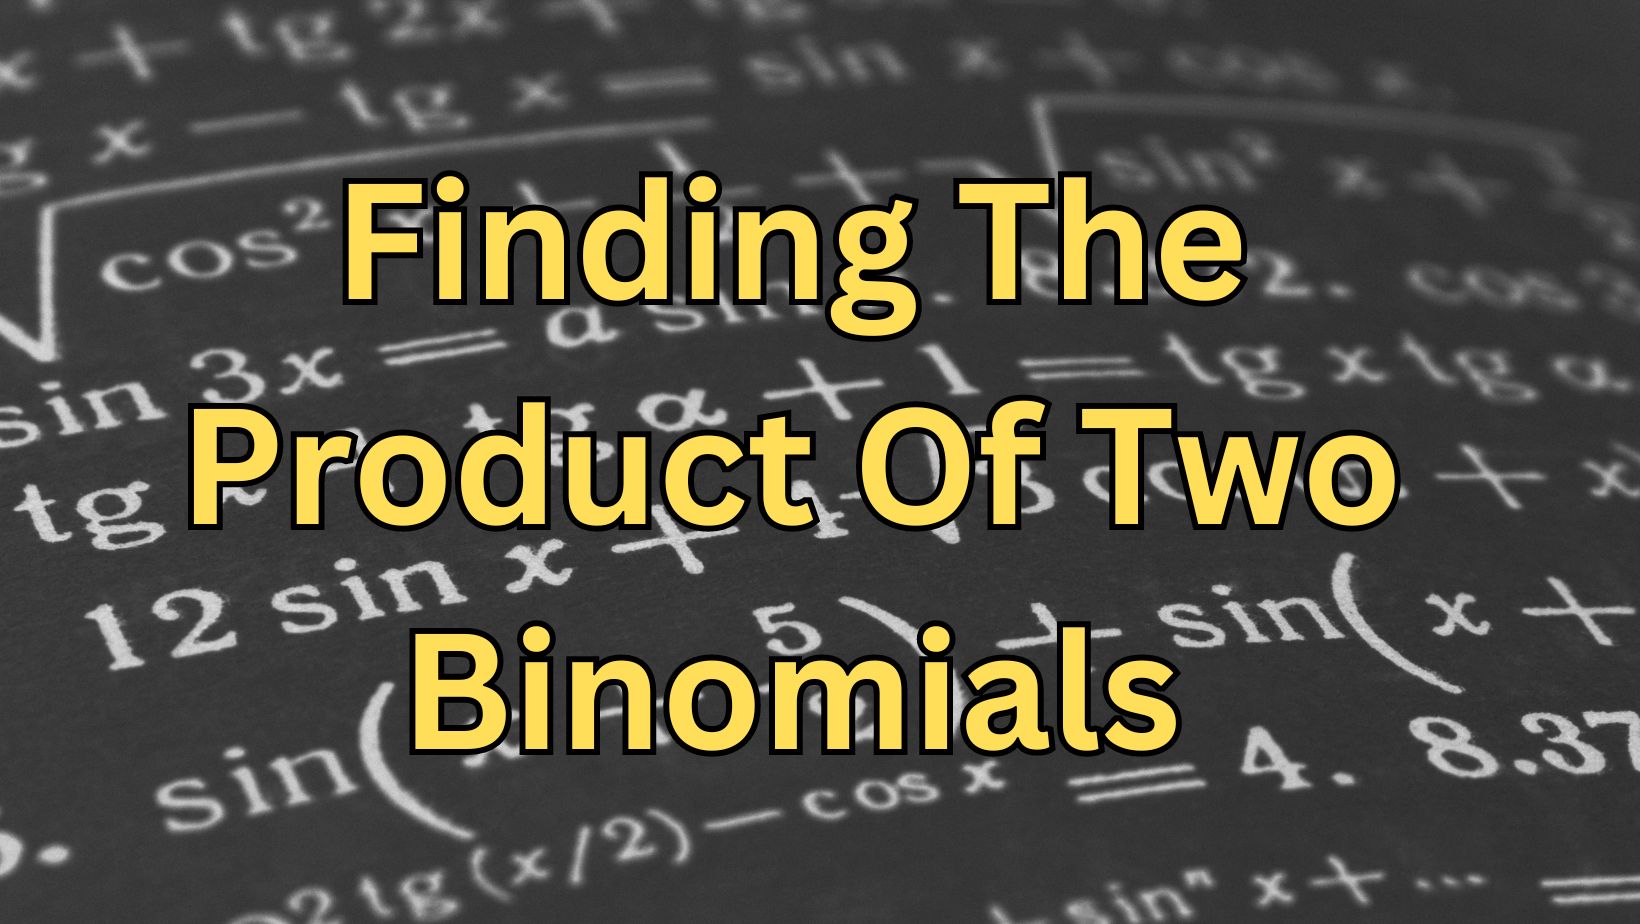 How To Find The Product Of Two Binomials In Maths?